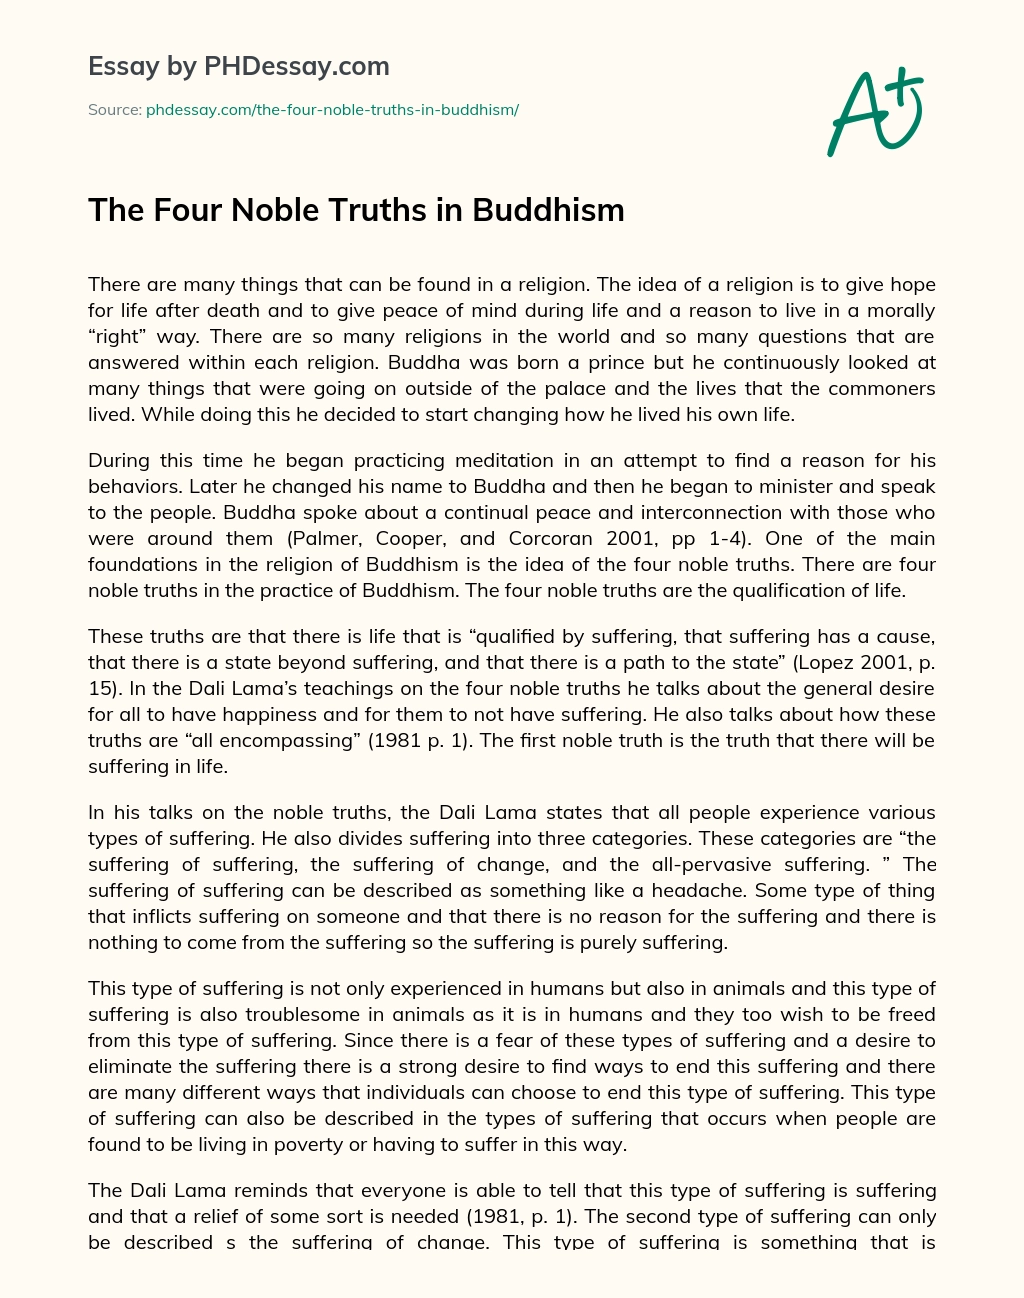 The Four Noble Truths in Buddhism essay